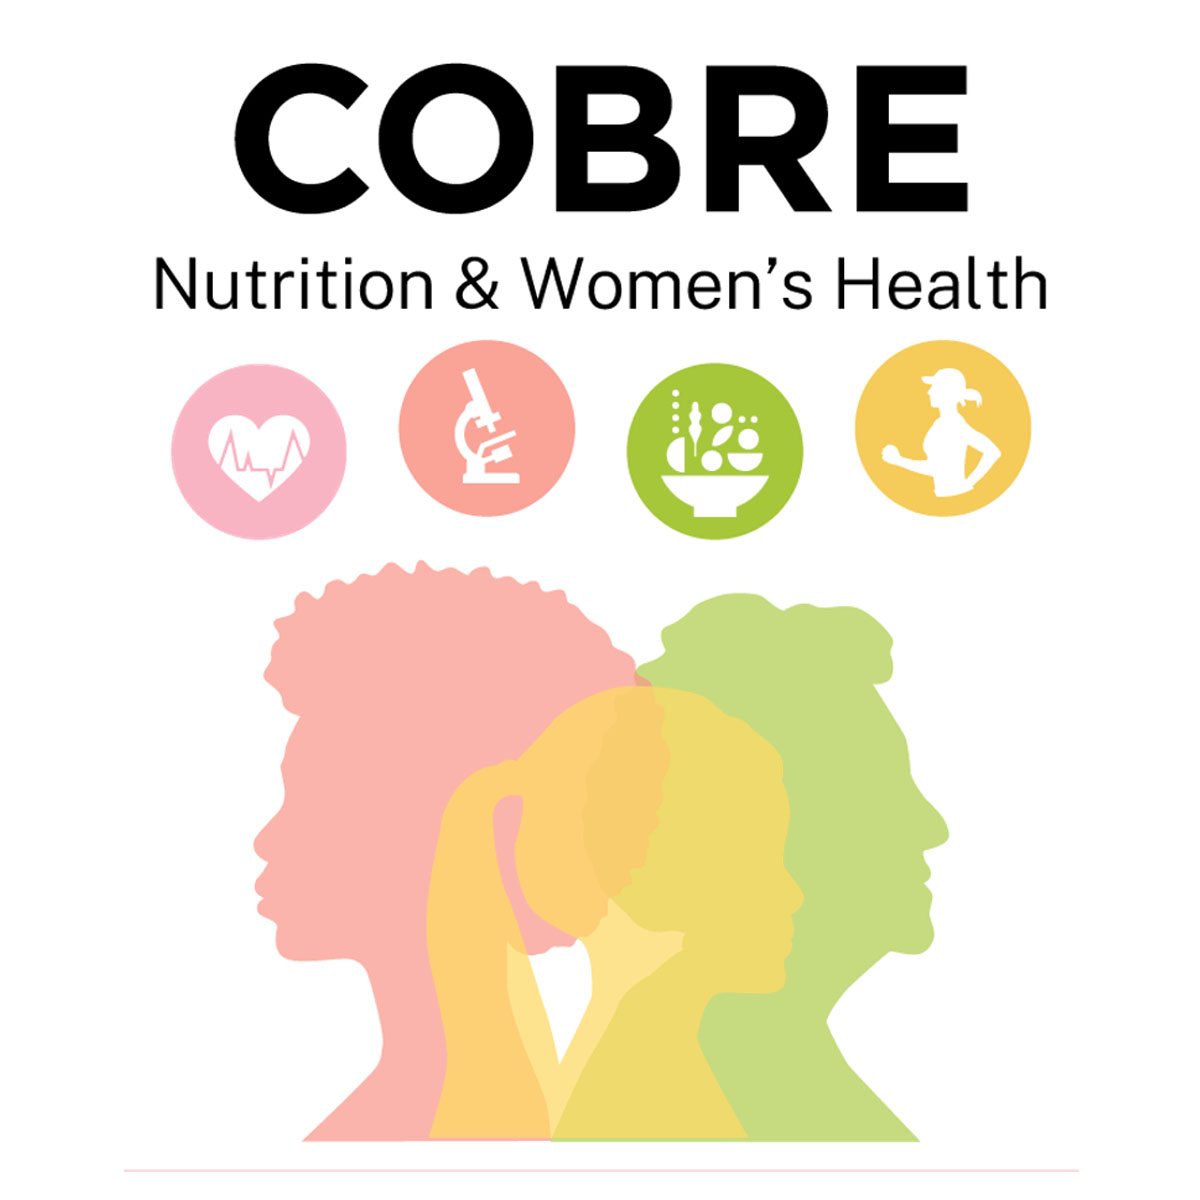 COBRE Nutrition and Women's Health graphic